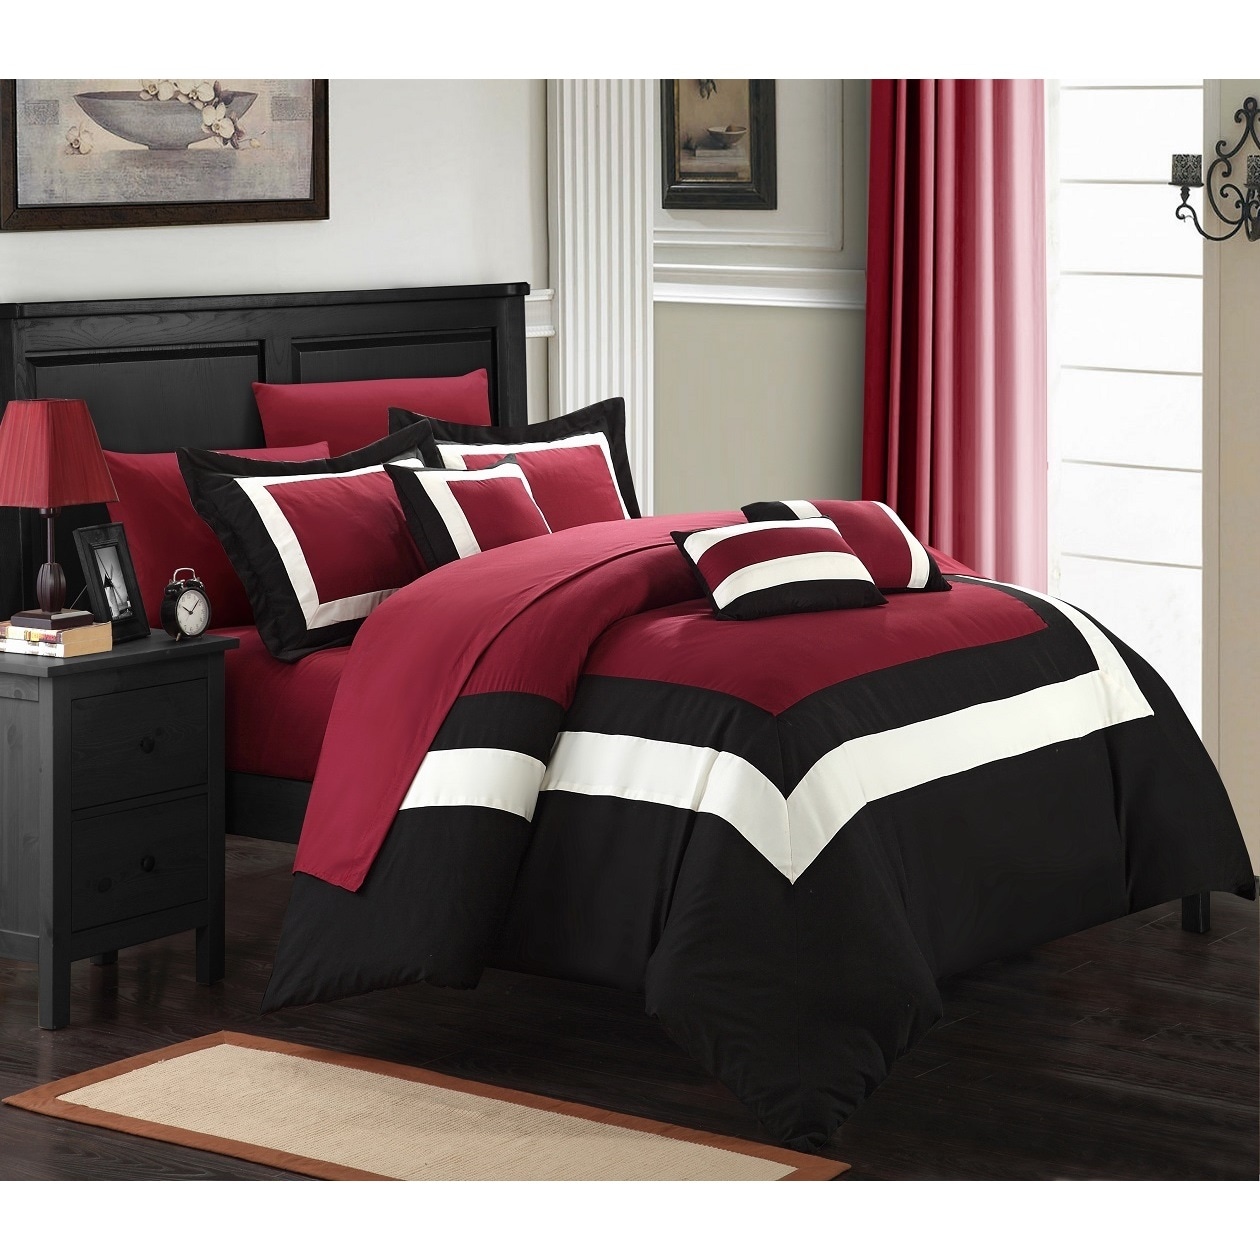 Shop Copper Grove Minesing Red White Black 10 Piece Bed In A Bag